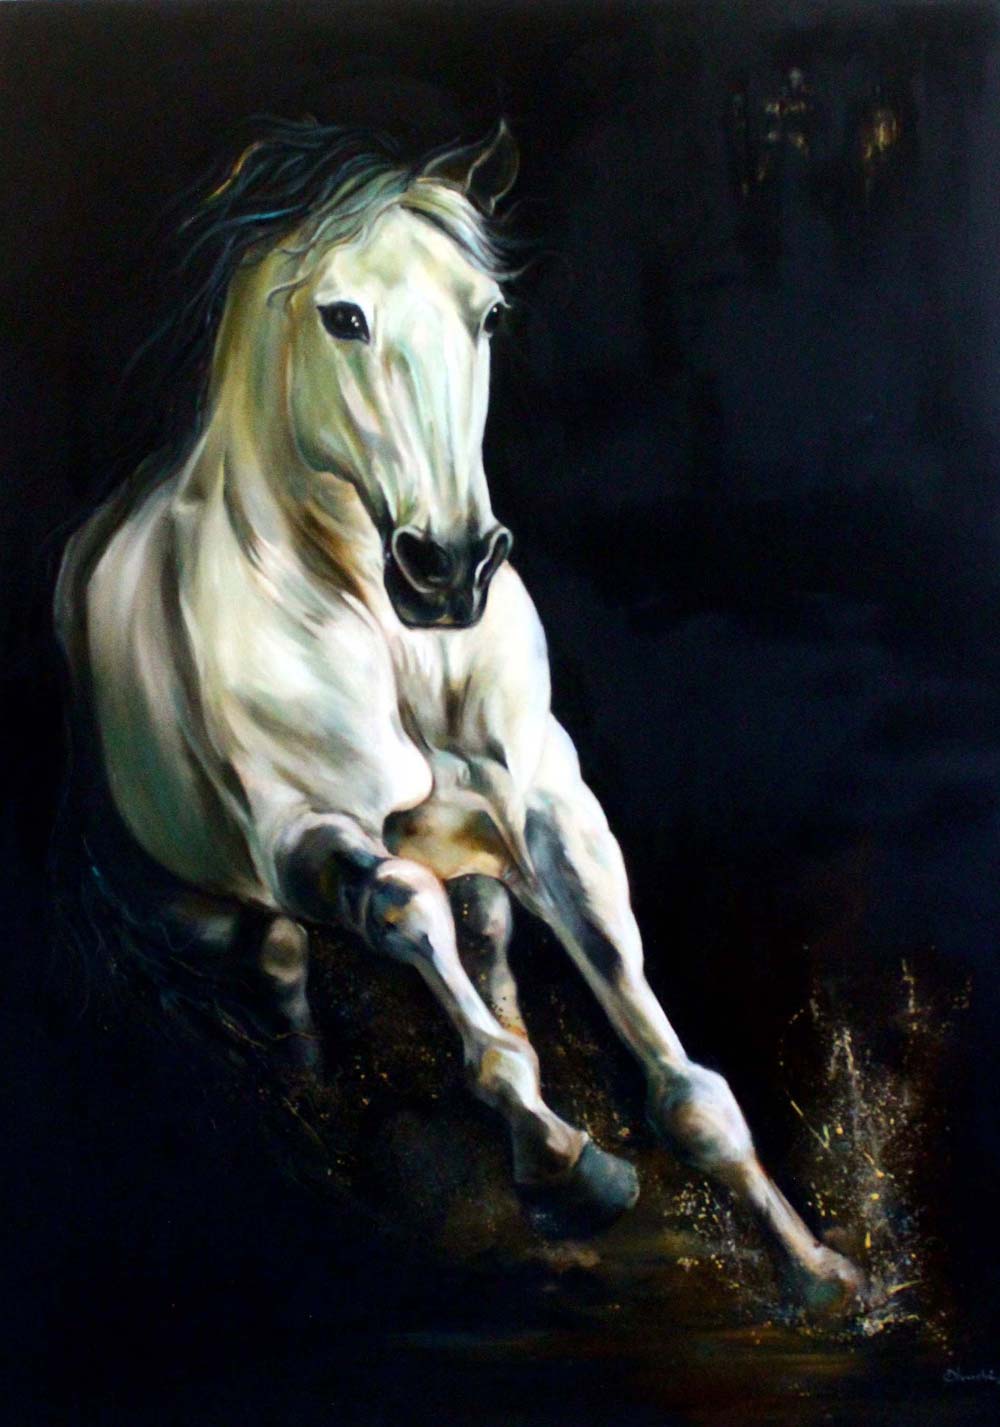 Realism Painting with Oil on Canvas "Darkness to Light" art by Dhanashri Kale